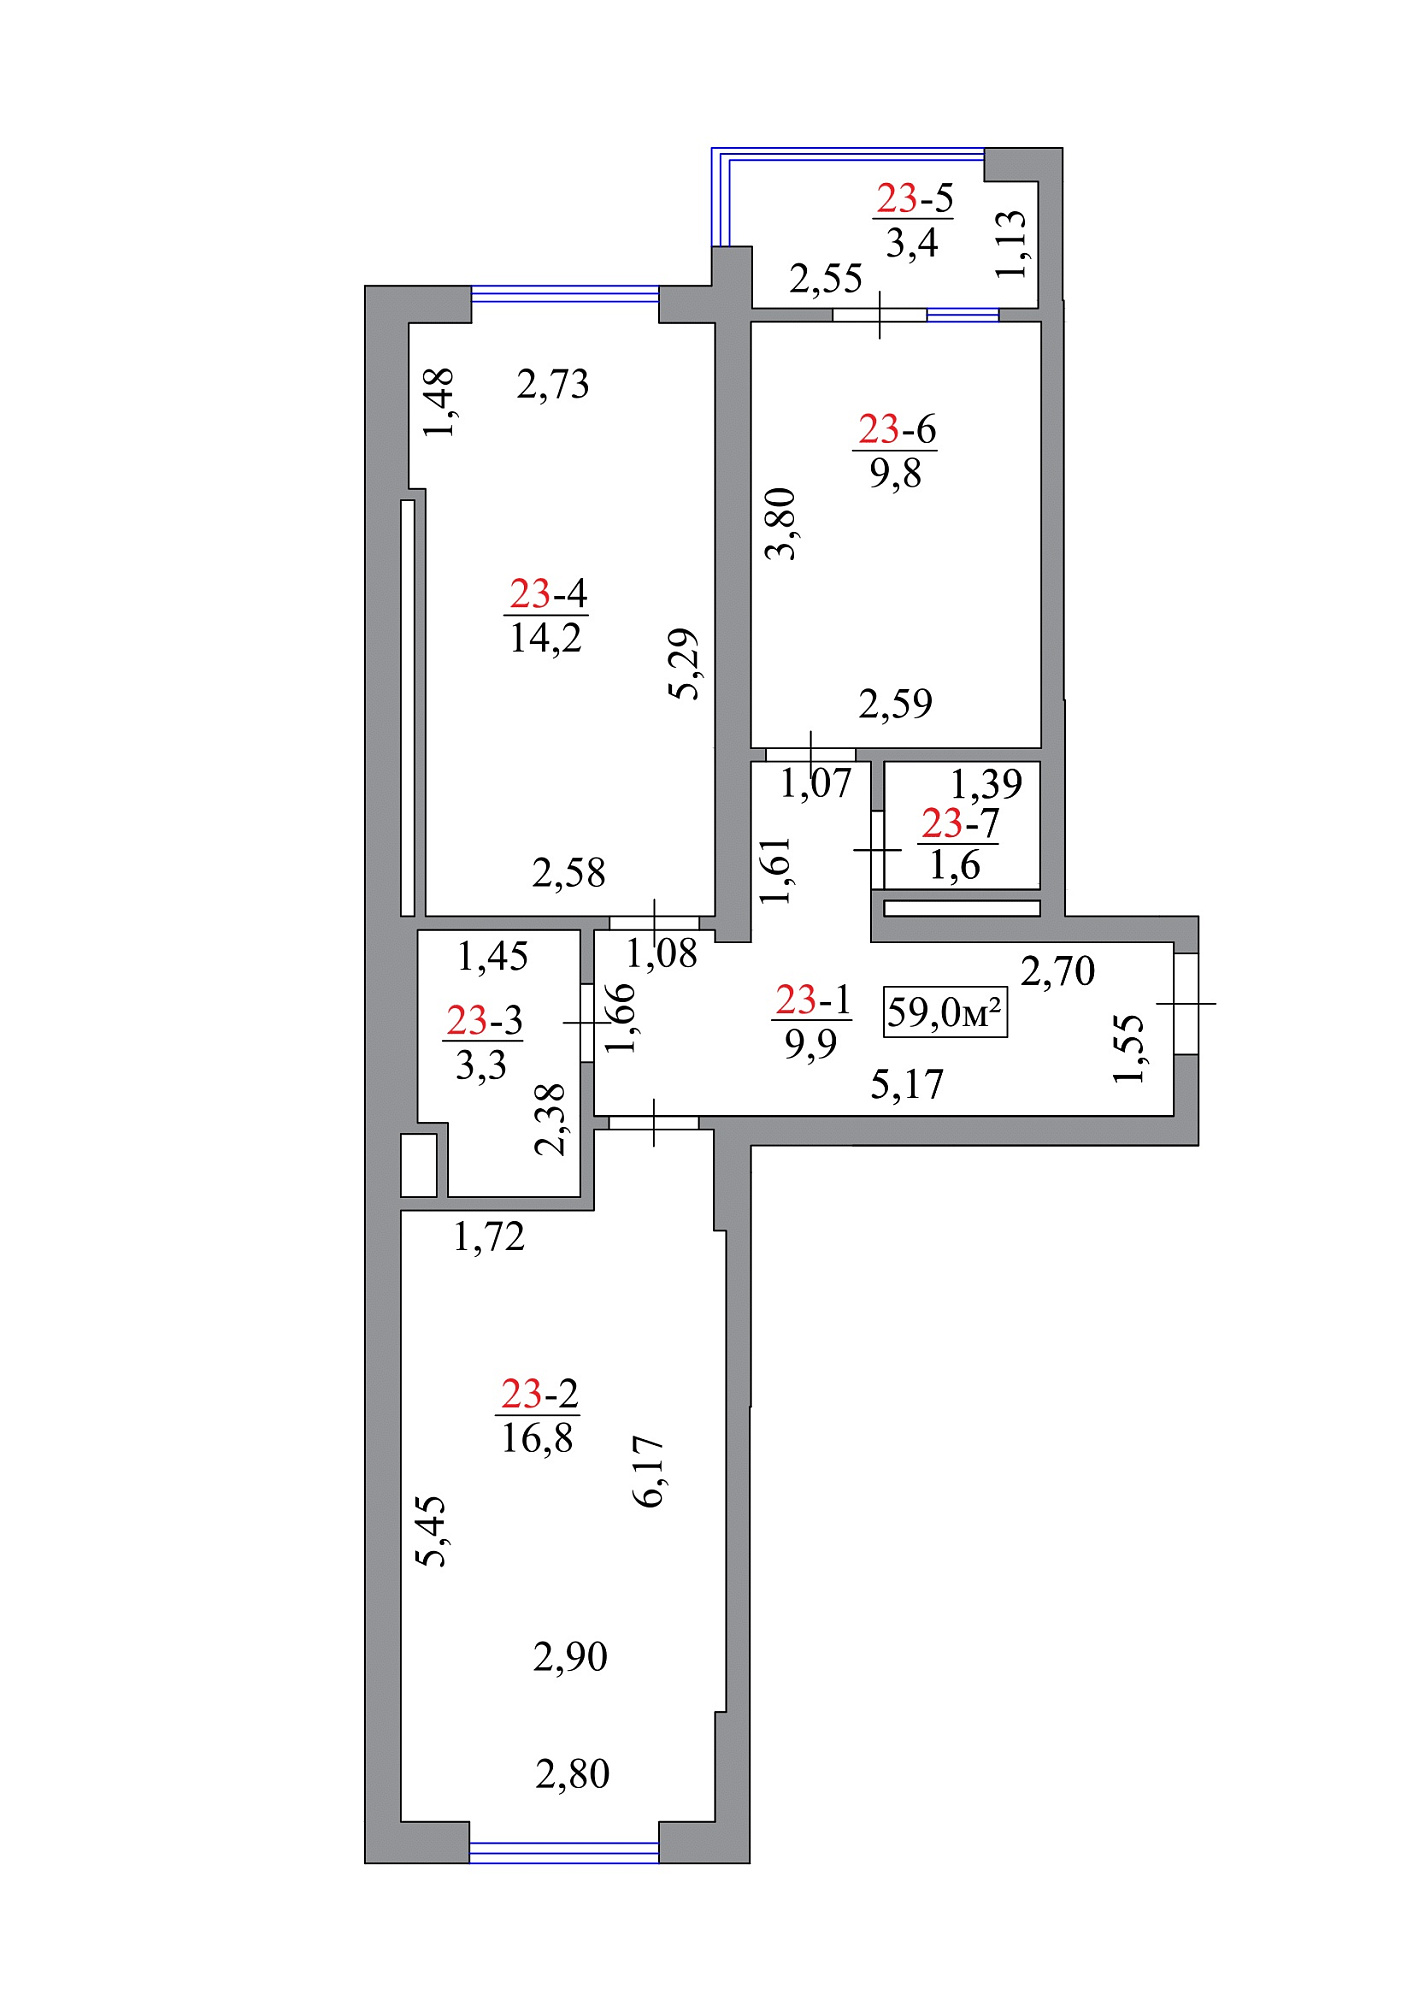 Planning 2-rm flats area 59m2, AB-07-03/00021.